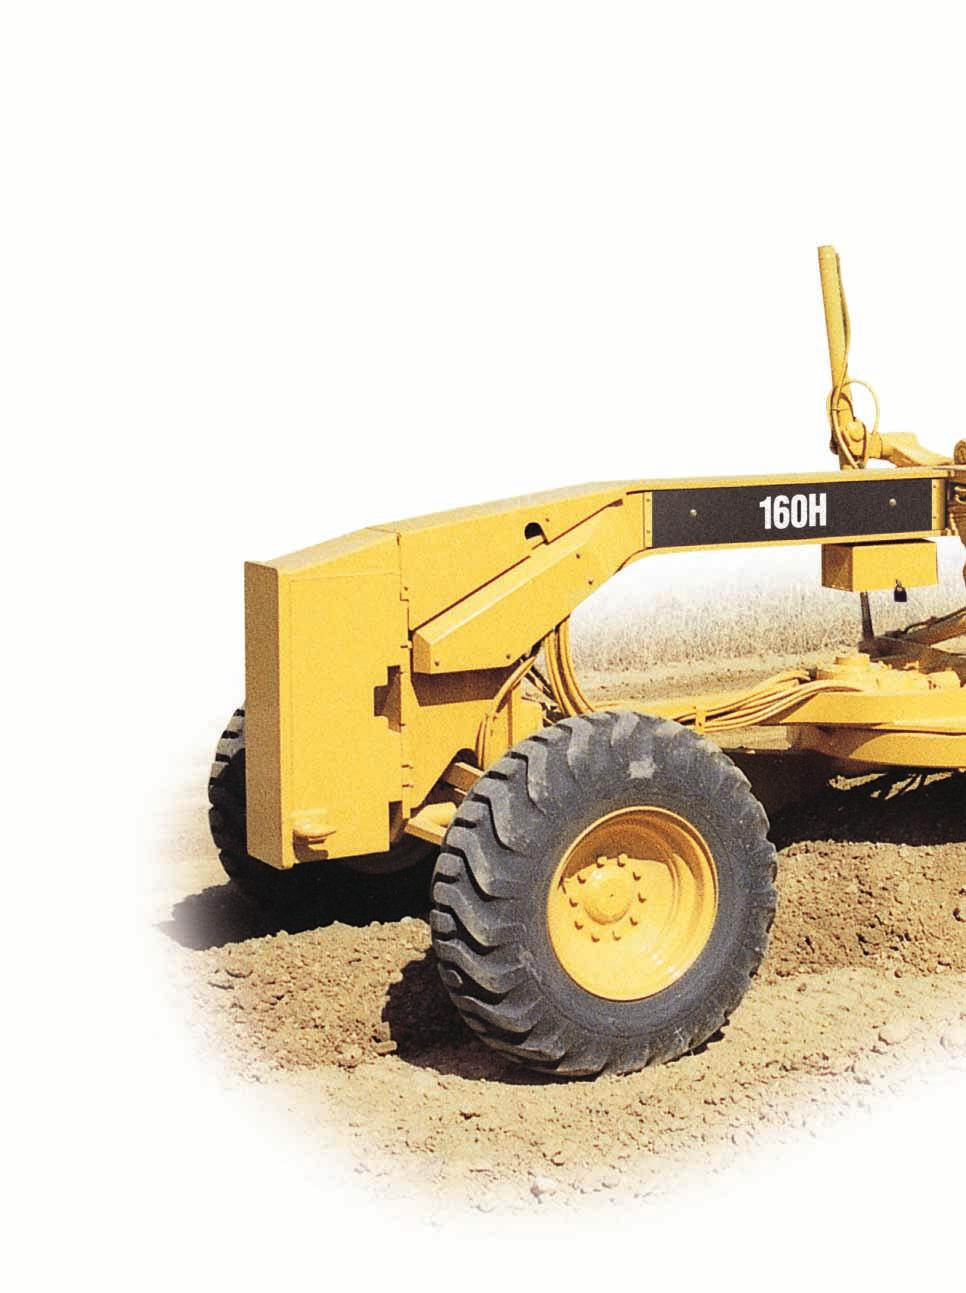 Caterpillar 160H Motor Grader The 160H blends productivity and durability to give you the best return on your investment.